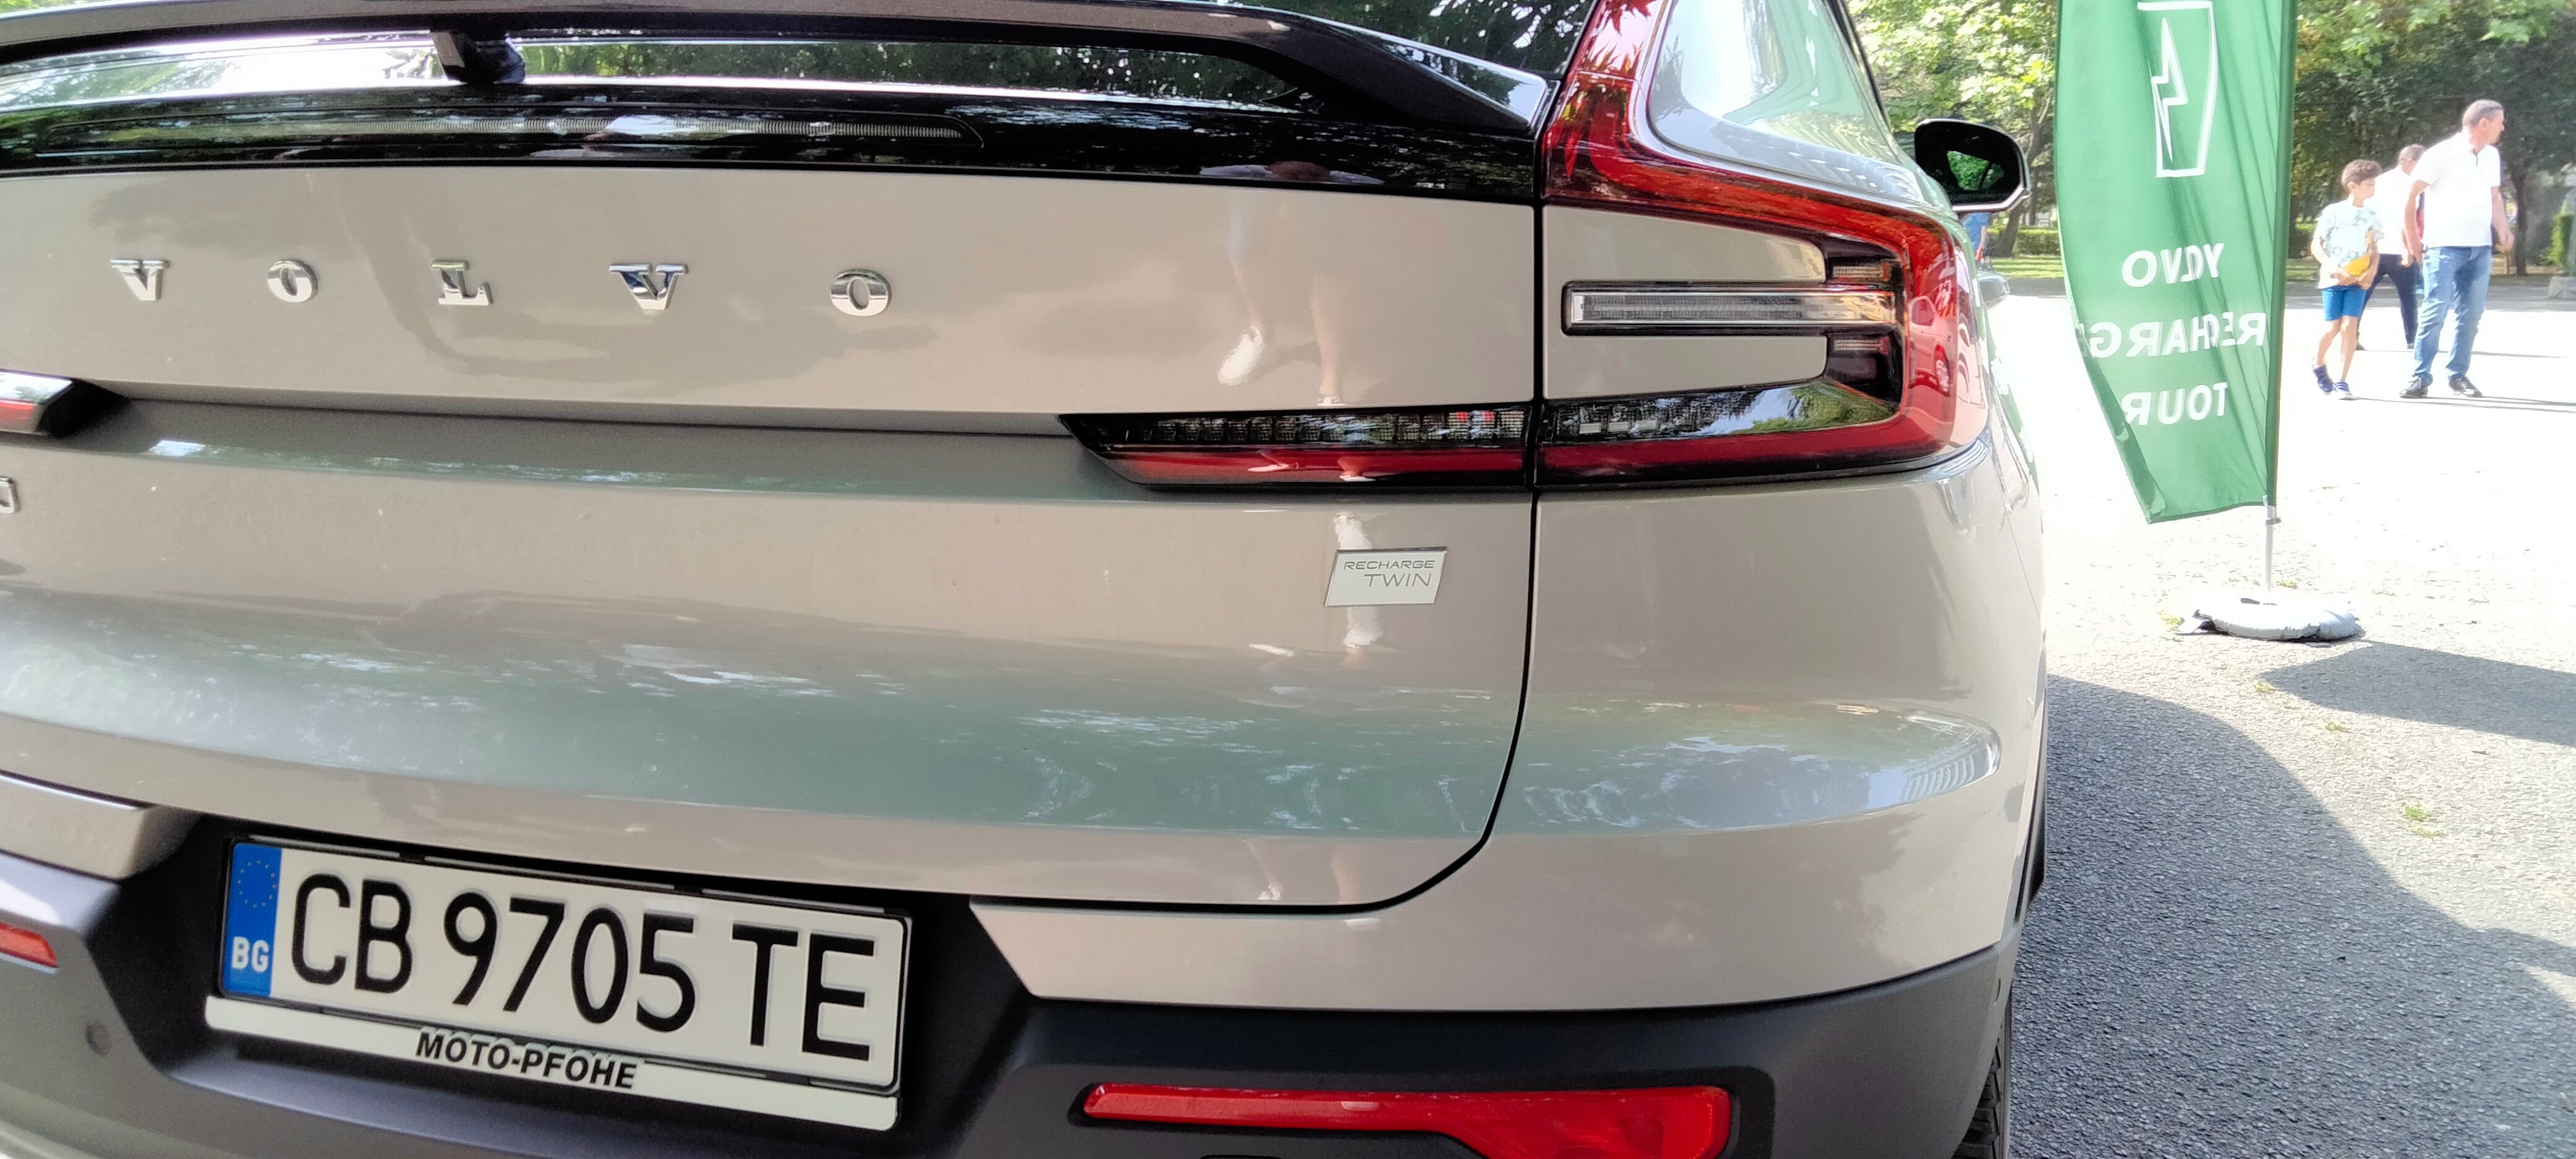 2023 2023 Volvo C40 Recharge Review: The Sportier Electric Alternative to the XC40